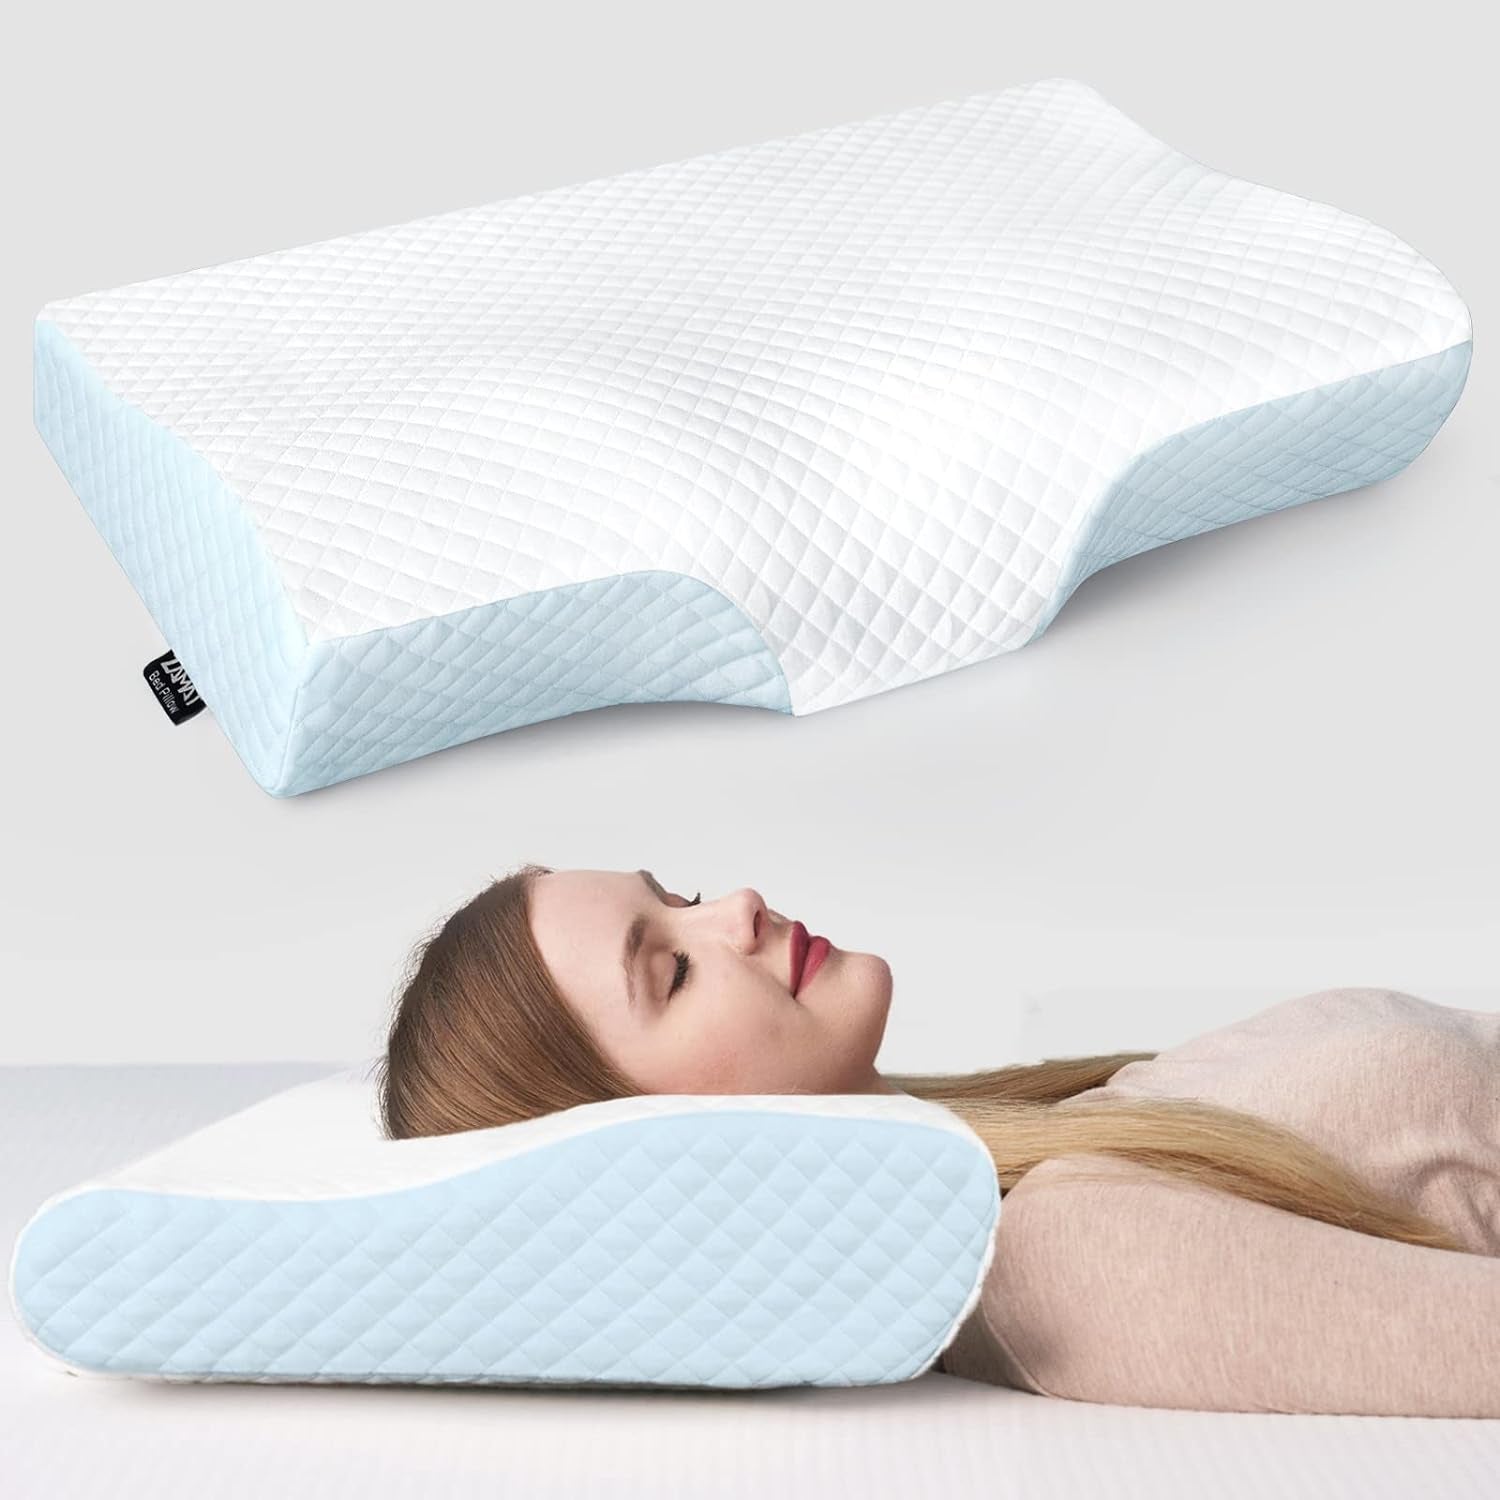 Orthopedic Contour Memory Foam Pillow for Neck Pain Relief - Adjustable Ergonomic Cervical Pillow for Sleeping - Washable Cover - Ideal for Side, Back, and Stomach Sleepers